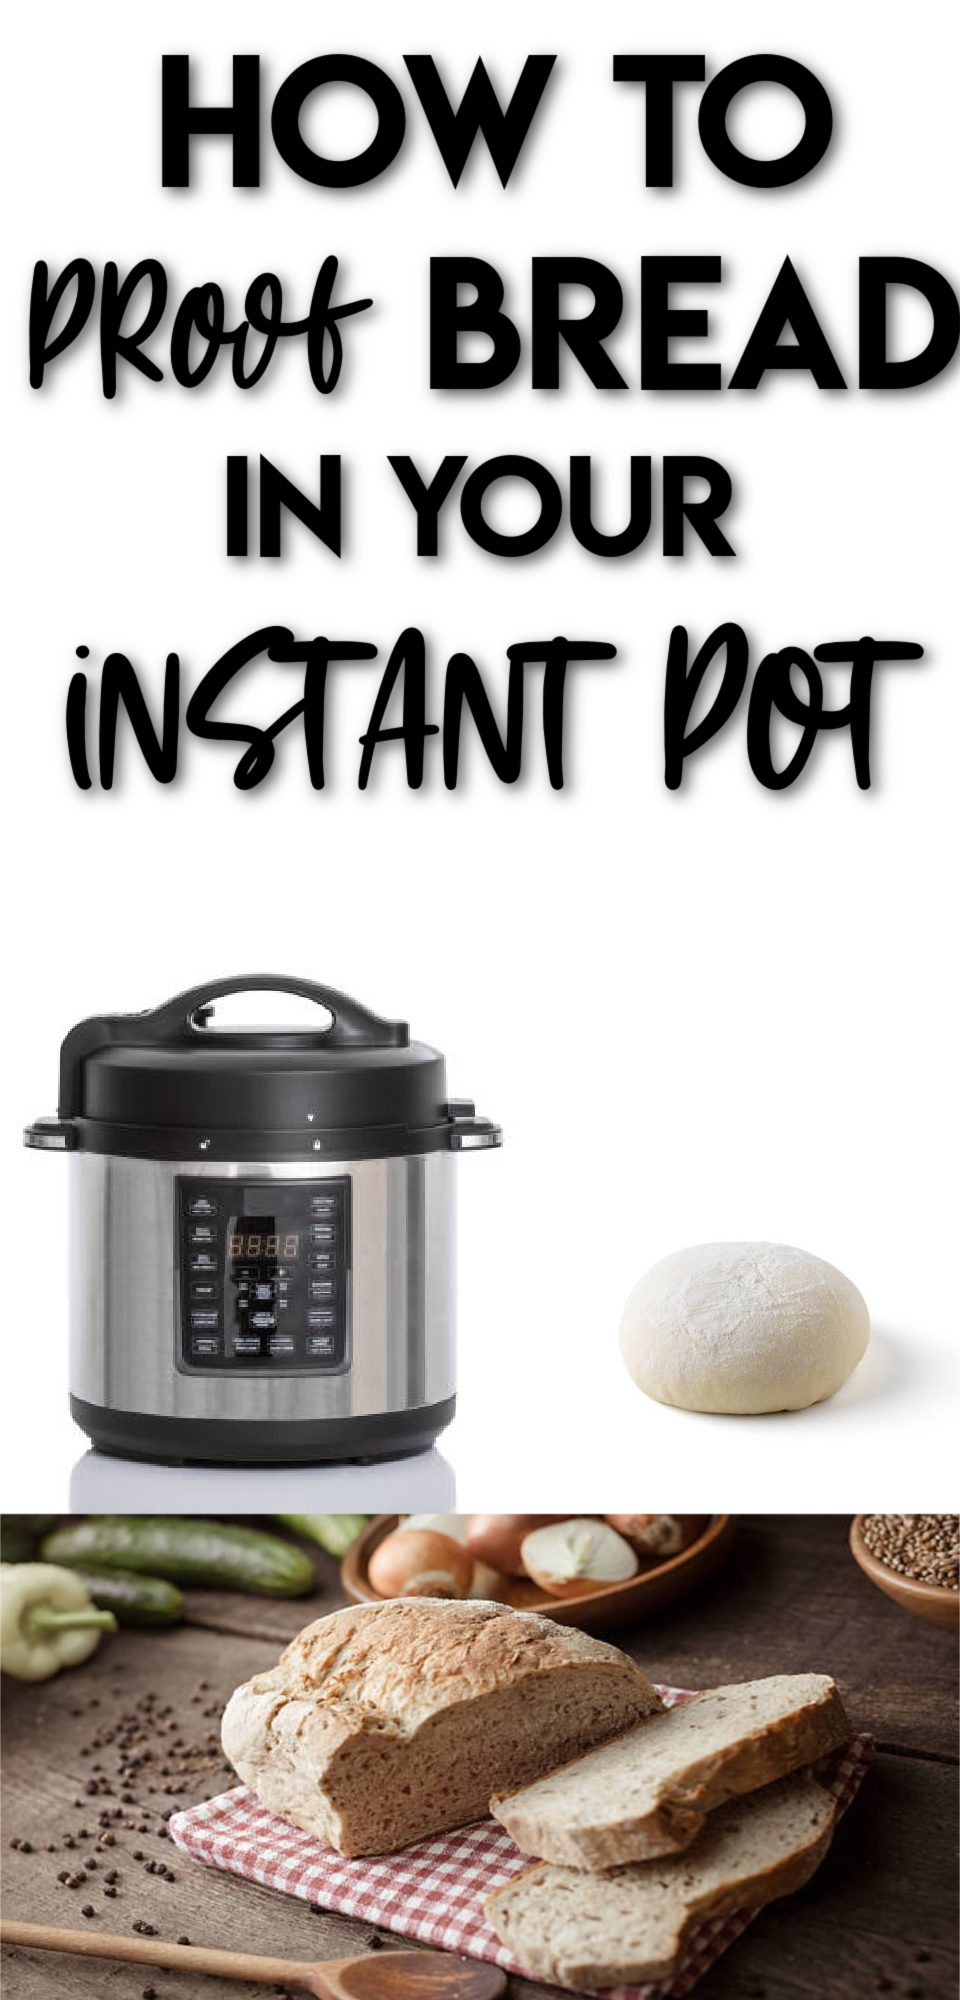 How To Proof Bread In Your Instant Pot